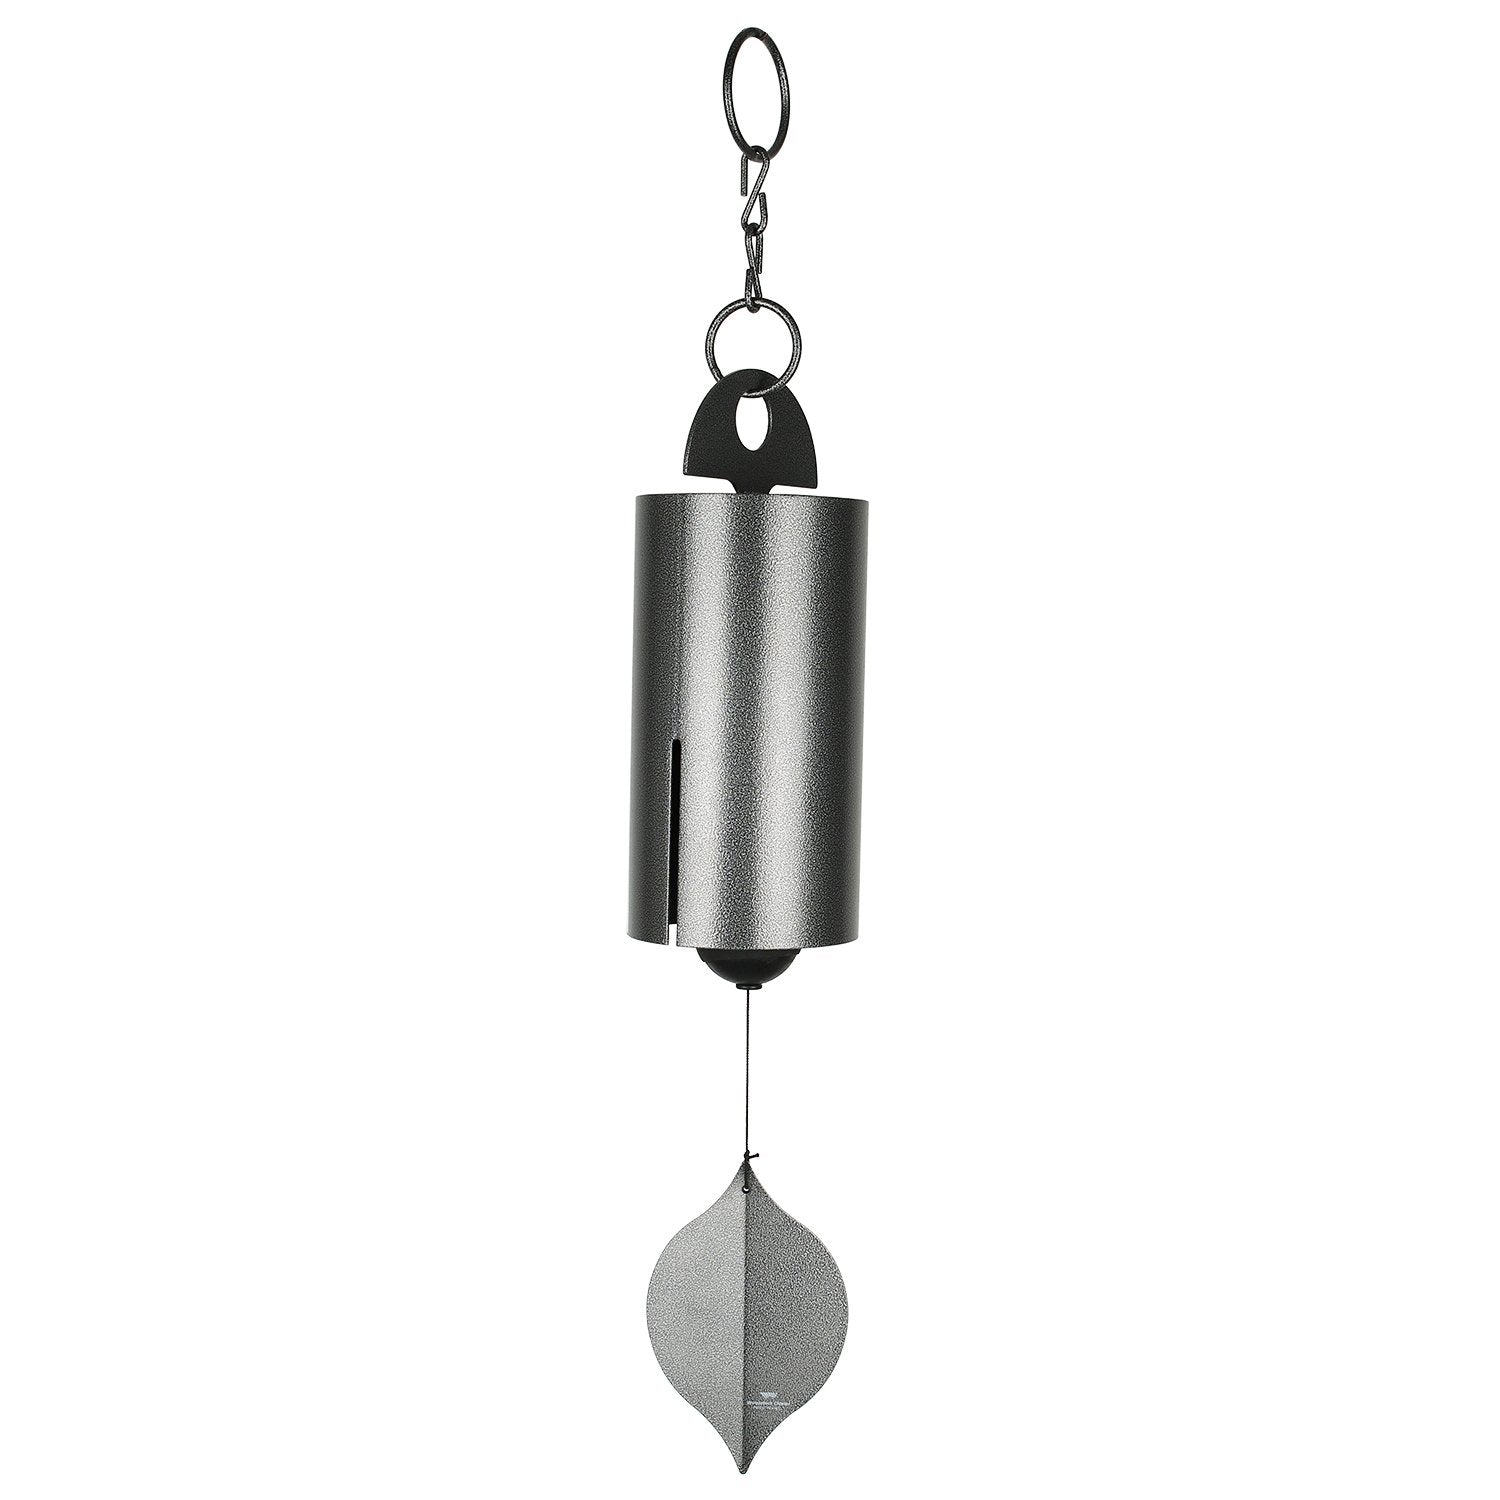 Heroic Windbell - Large, Antique Silver full product image